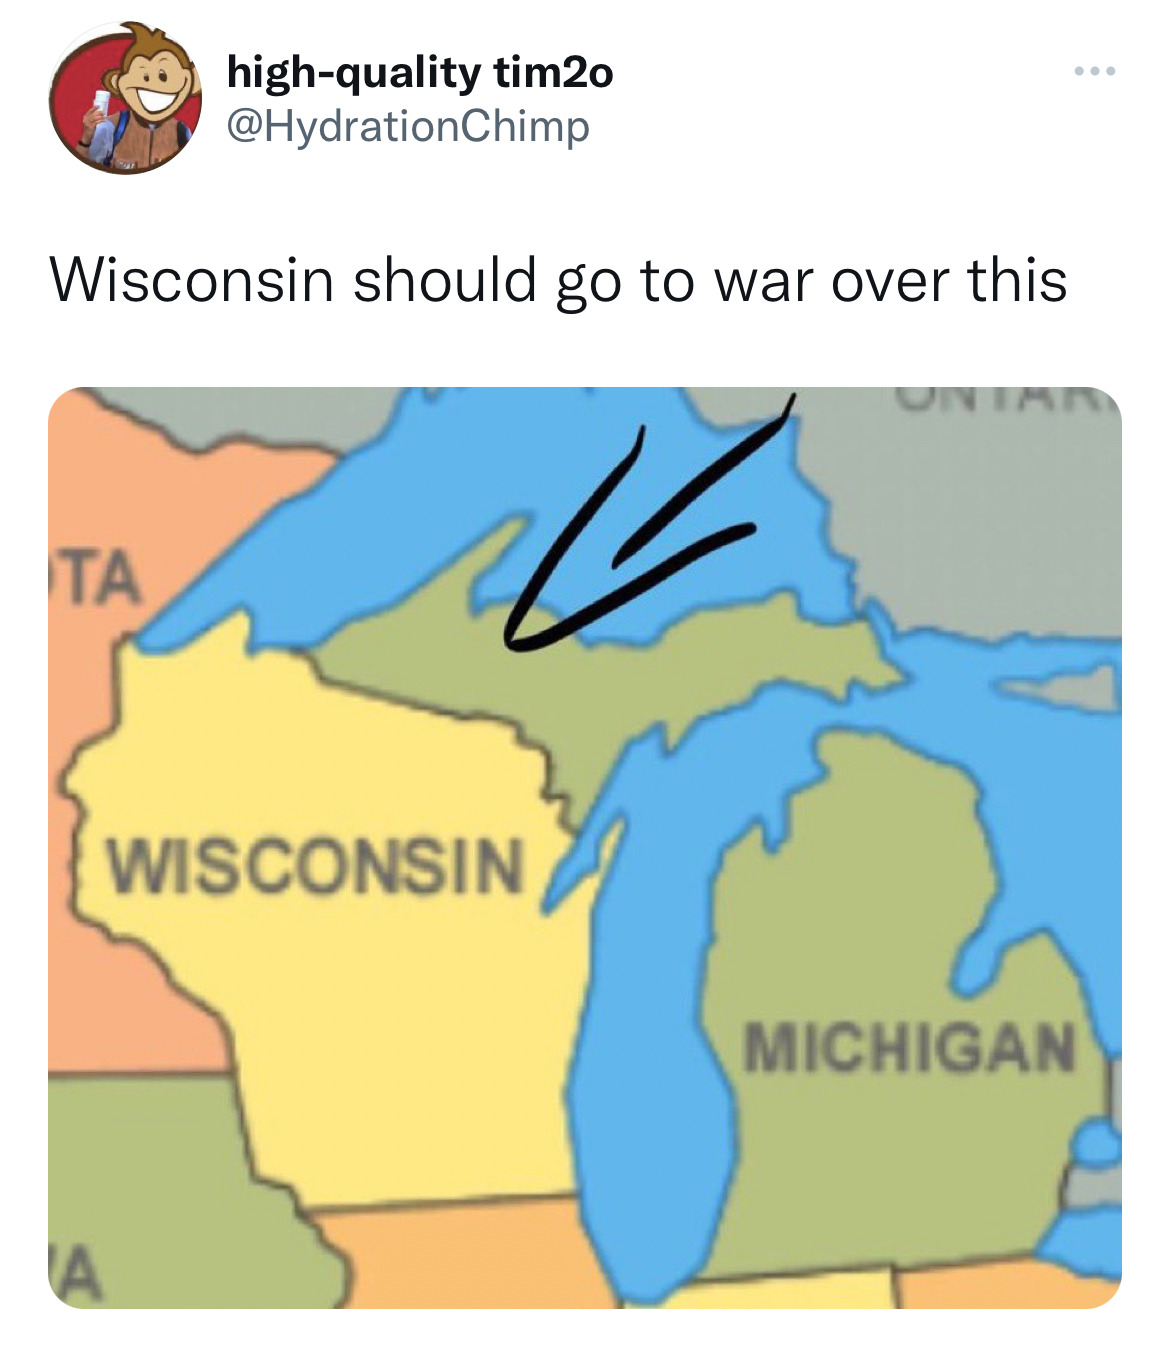 Fresh and funny tweets - wisconsin upper peninsula cowards - highquality tim20 Wisconsin should go to war over this Wisconsin A Michigan